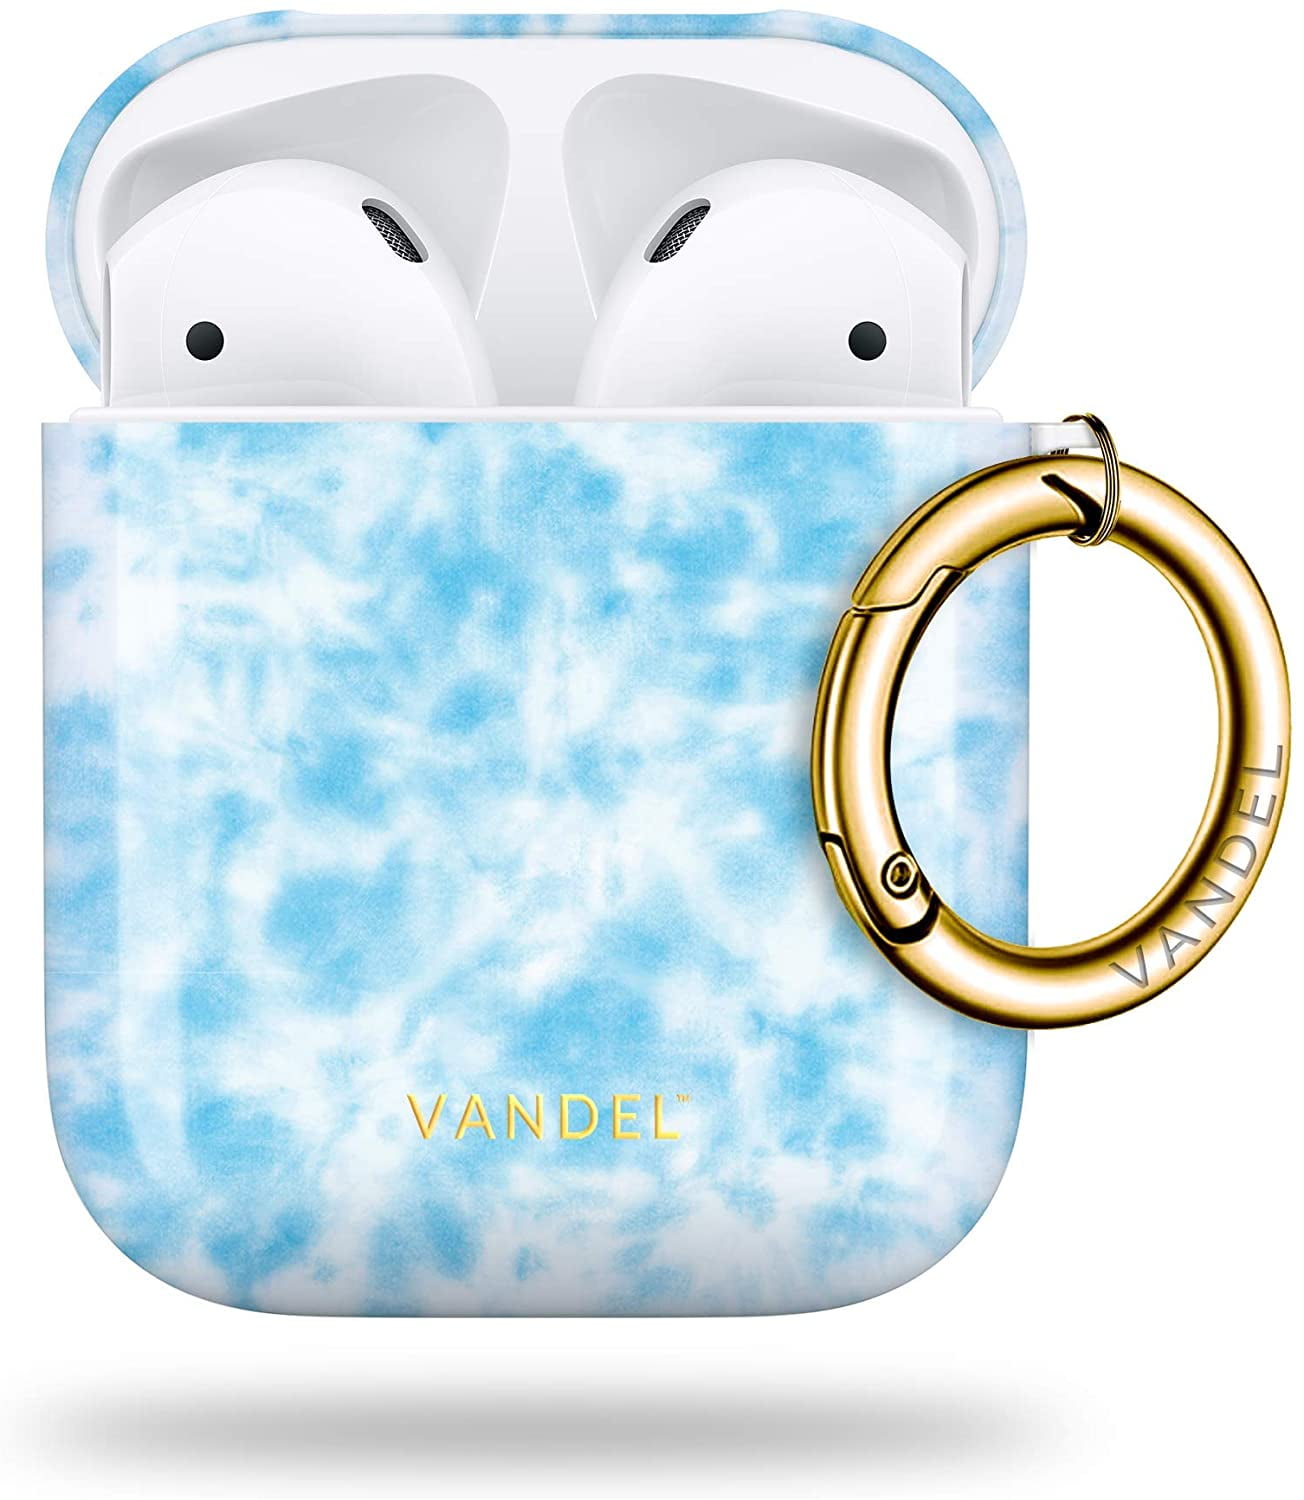 Vandel Airpods Pro Case for Women, Hard Apple AirPod Pro Case Cover with  Keychain for Girls, Cool Lu…See more Vandel Airpods Pro Case for Women,  Hard